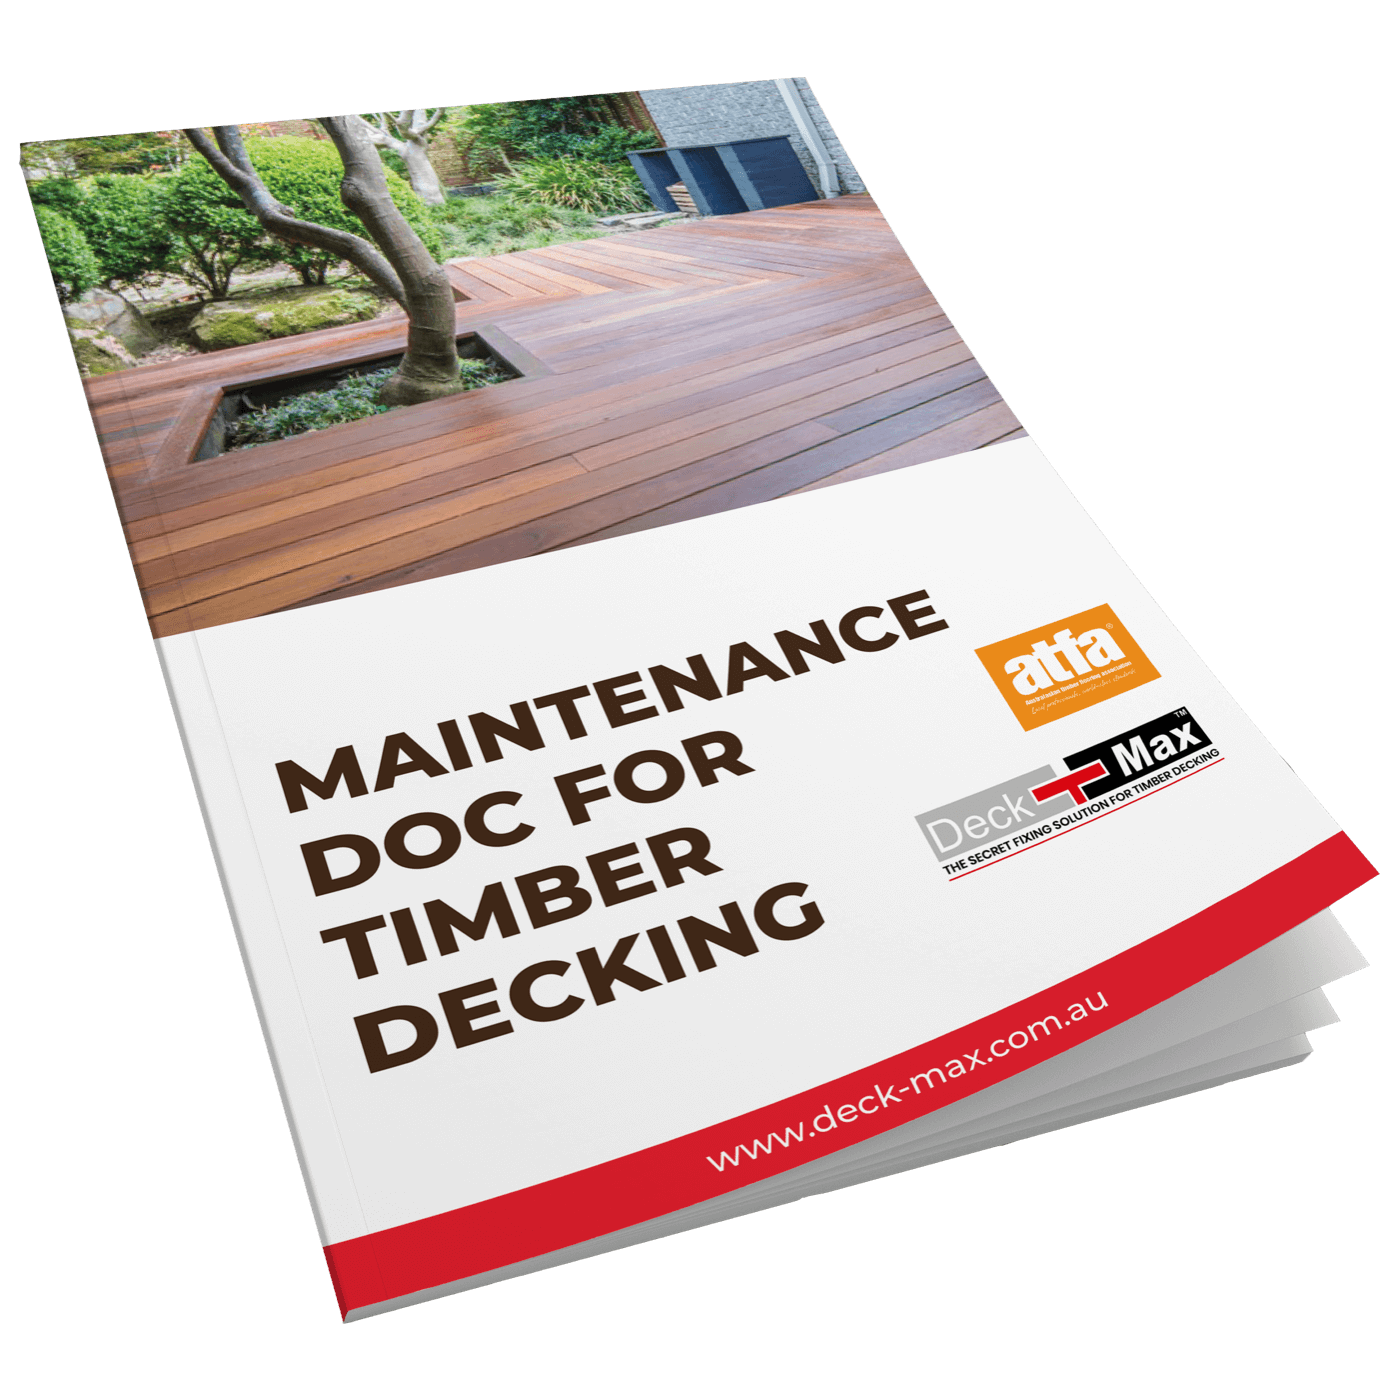 Maintenance Doc For Timber Decking